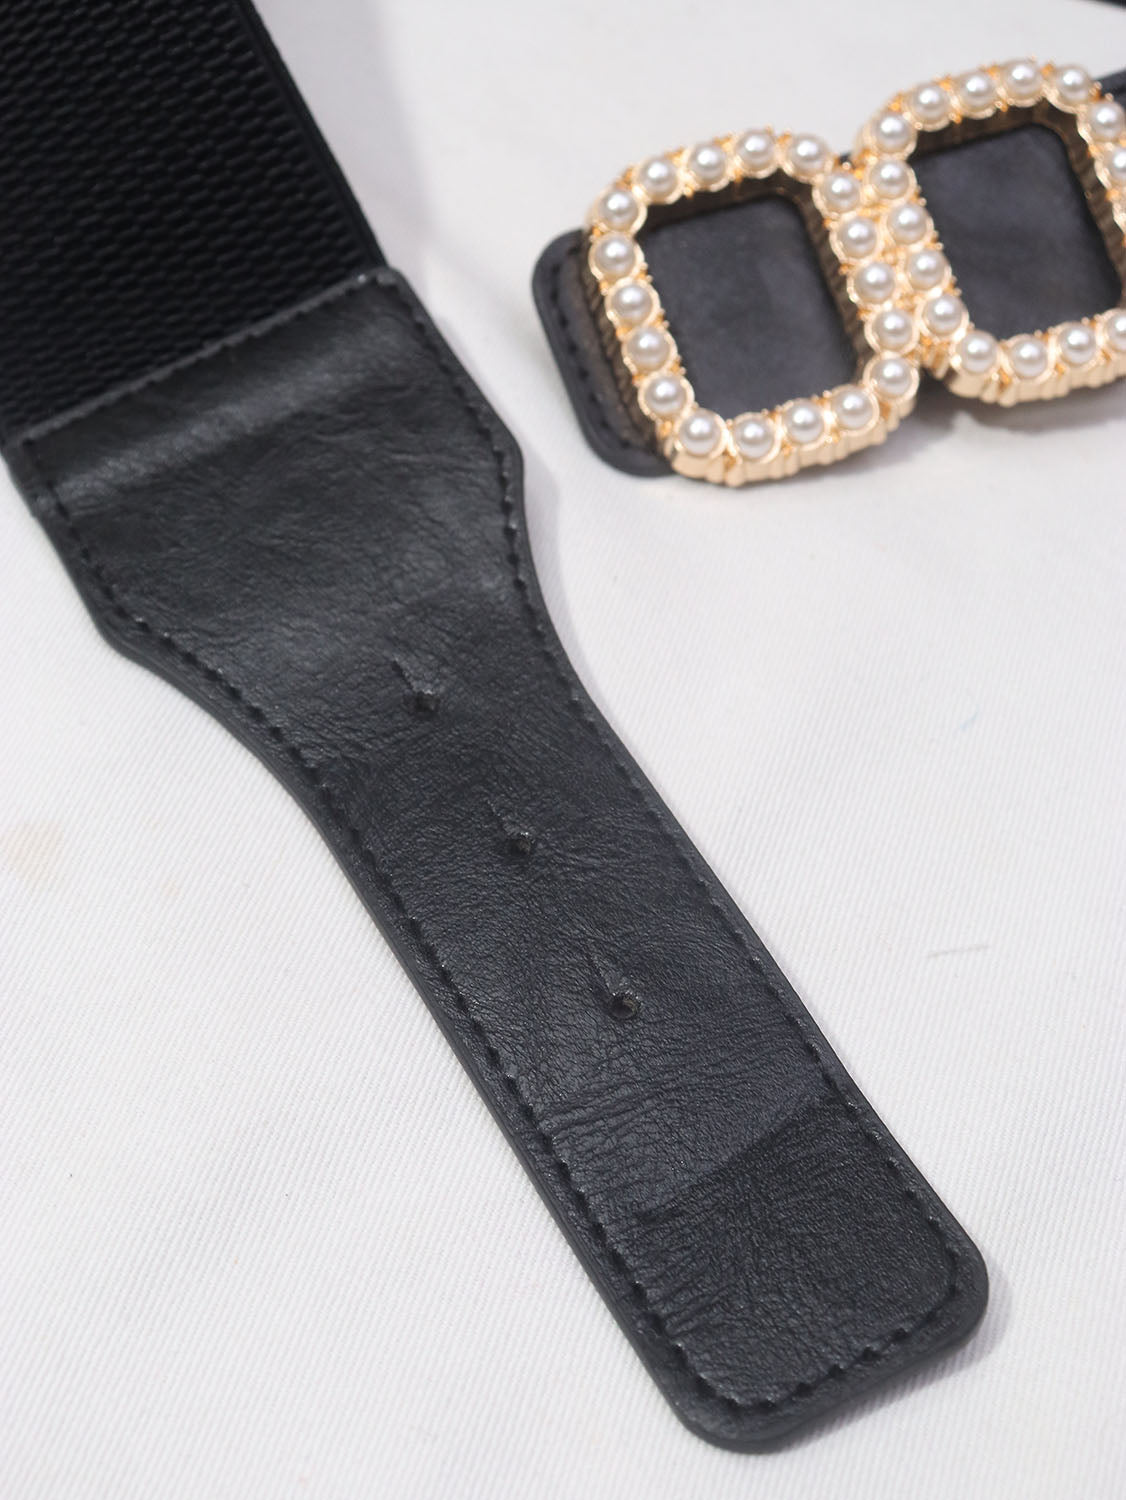 Stretchable Blackout Belts - Stylish & Secure Accessory for Professionals - Luxurion World